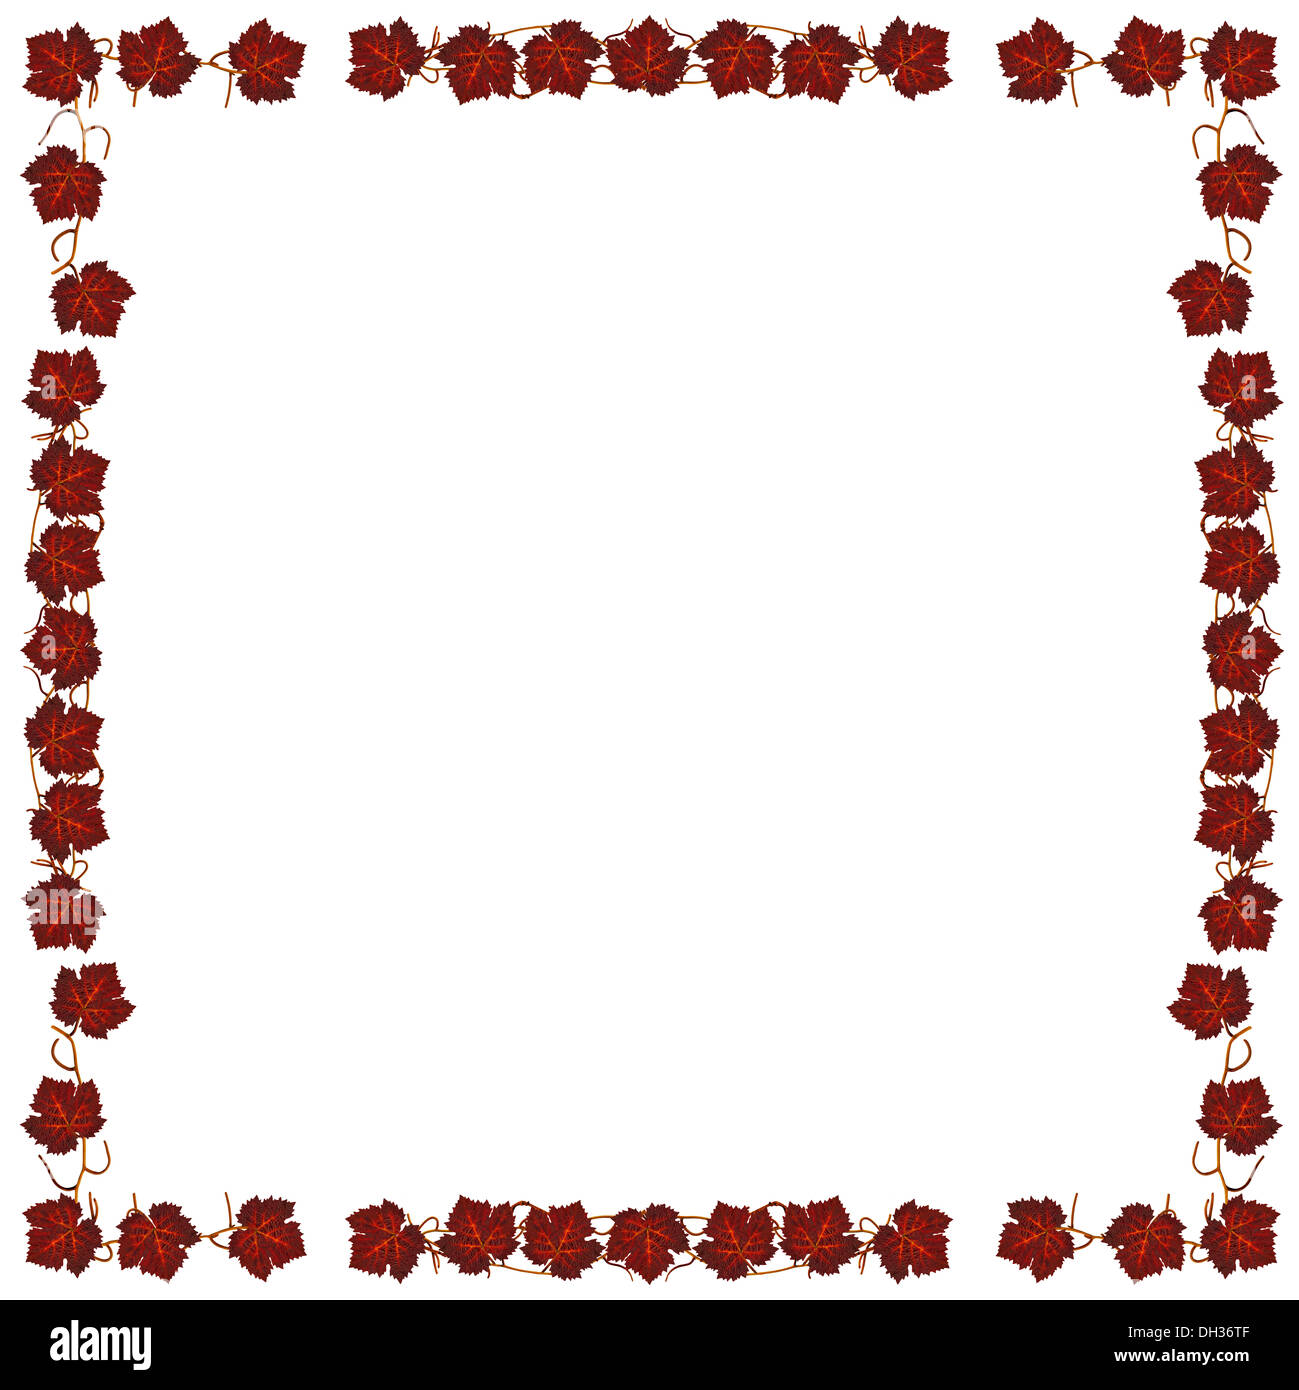 Frame with dark red leaves of vines Stock Photo